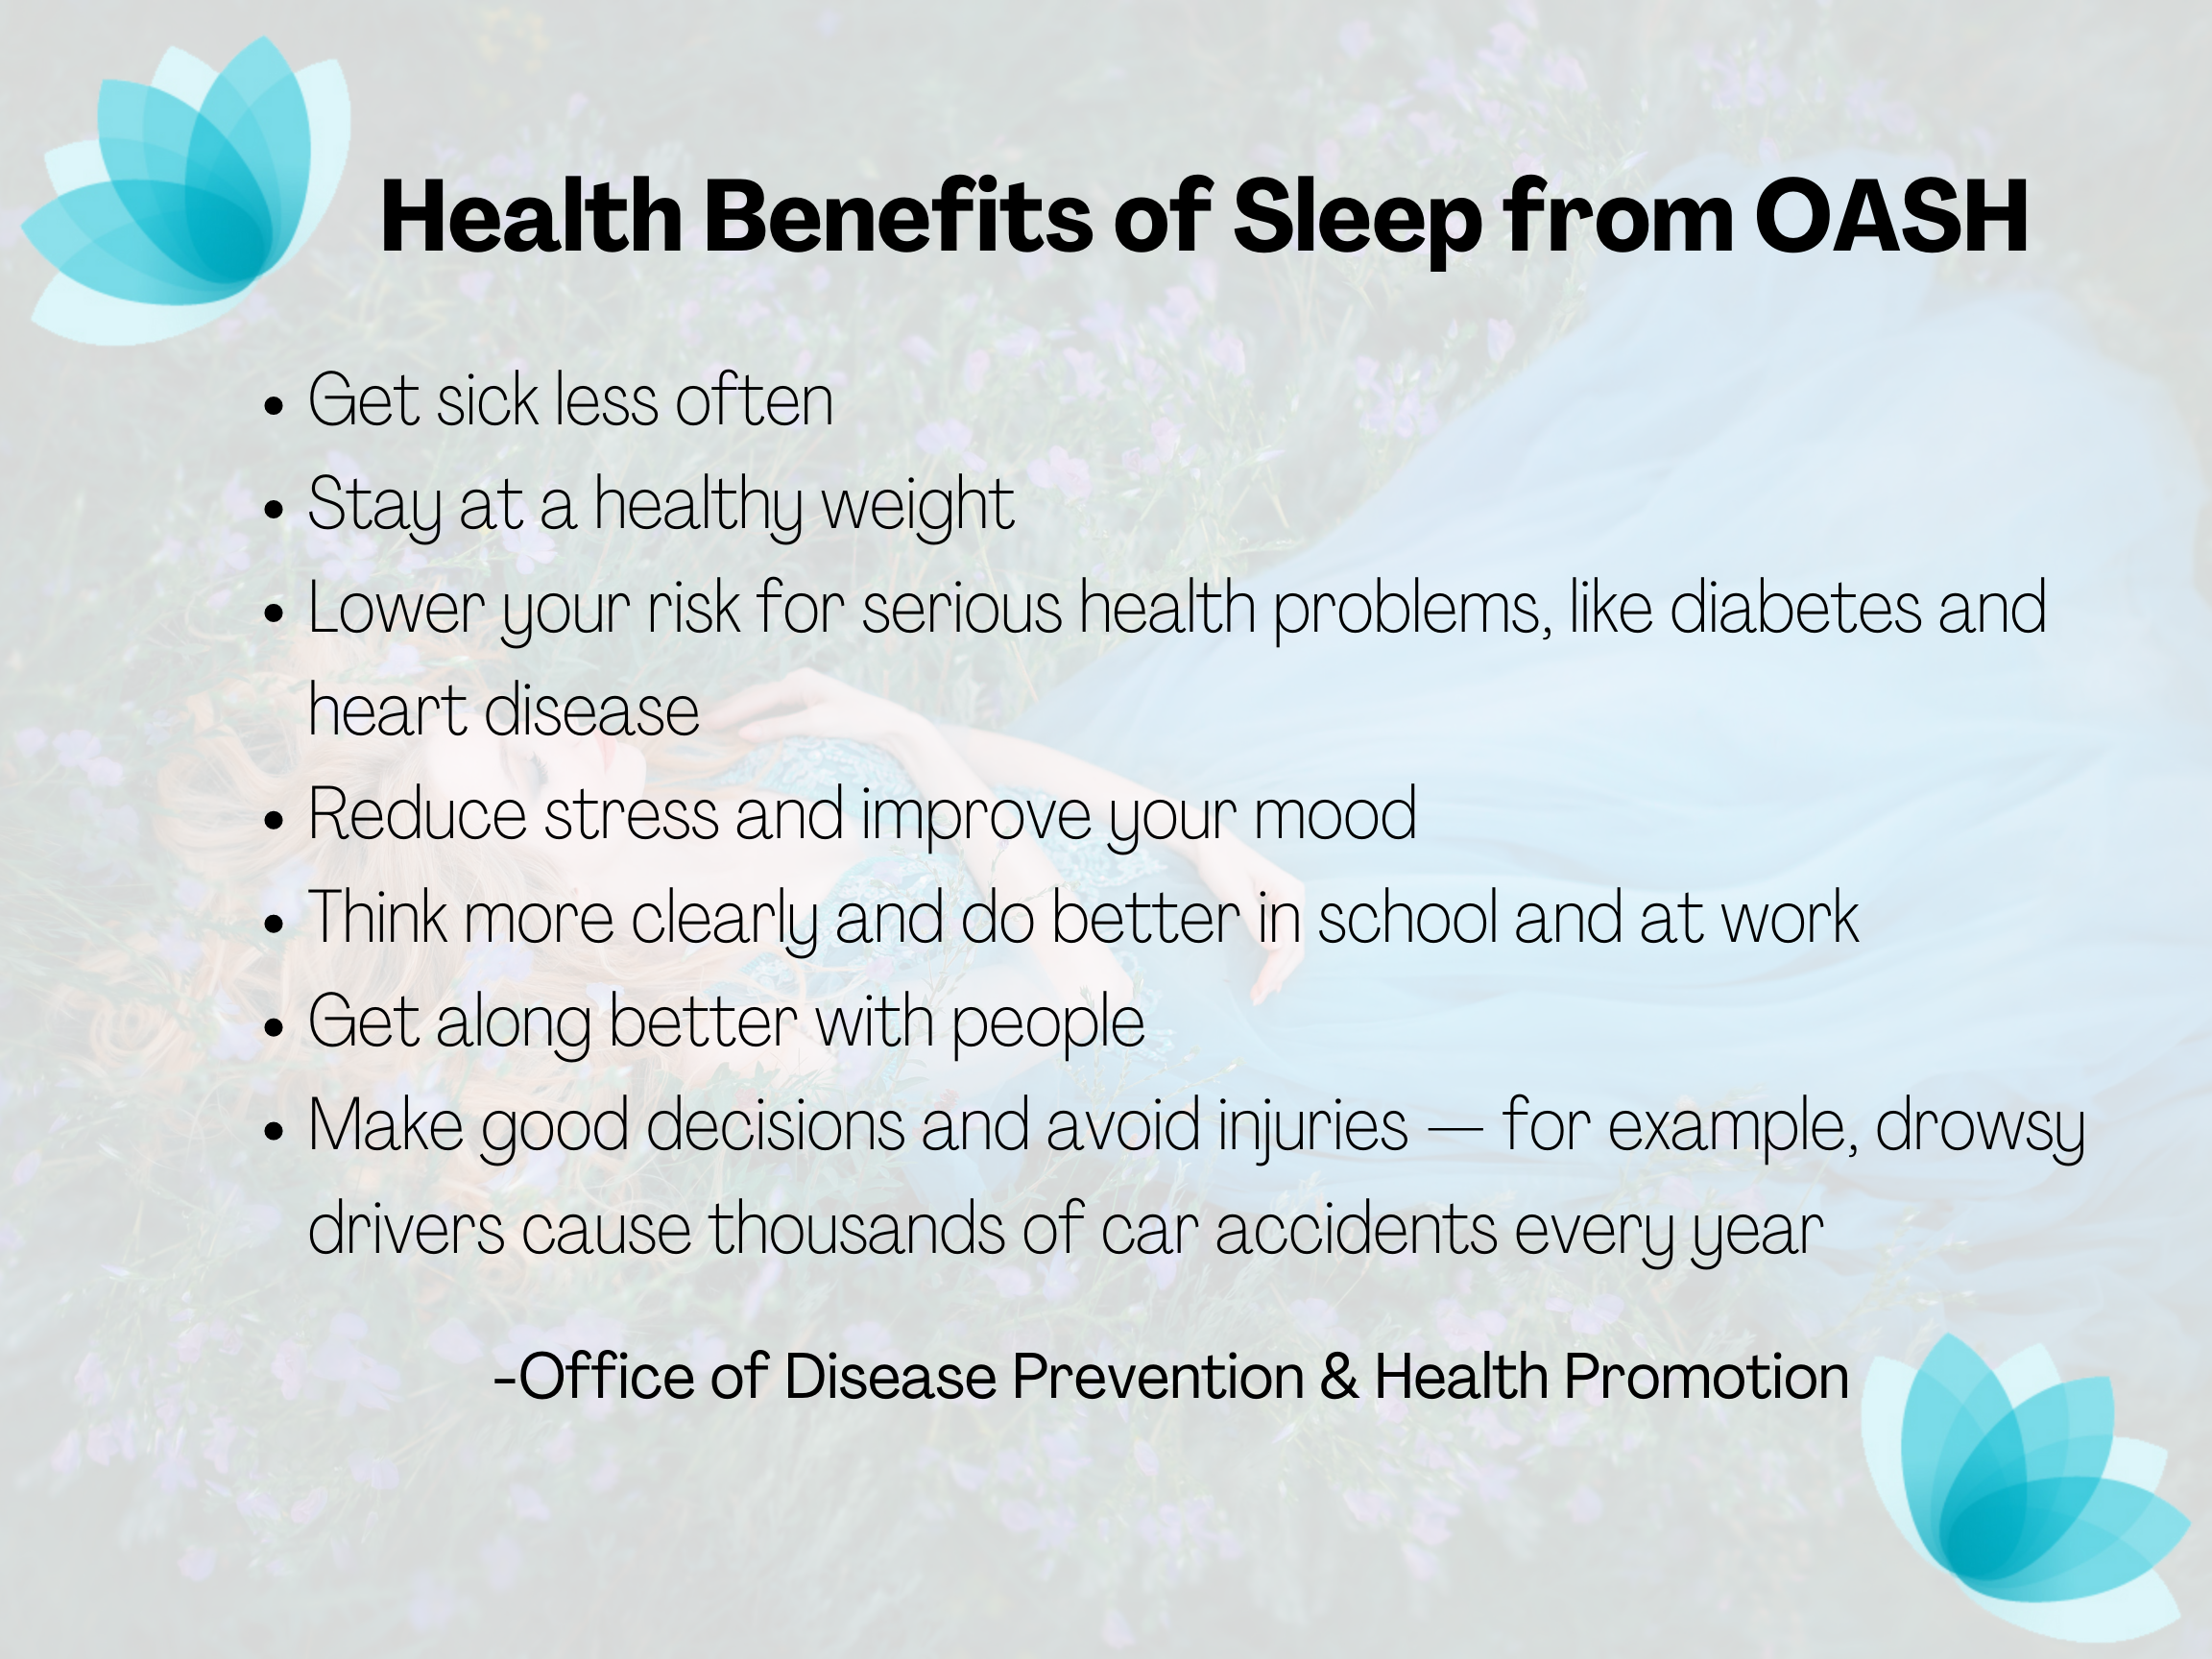 Health benefits of sleep from Office of Disease Prevention & Health Promotion.